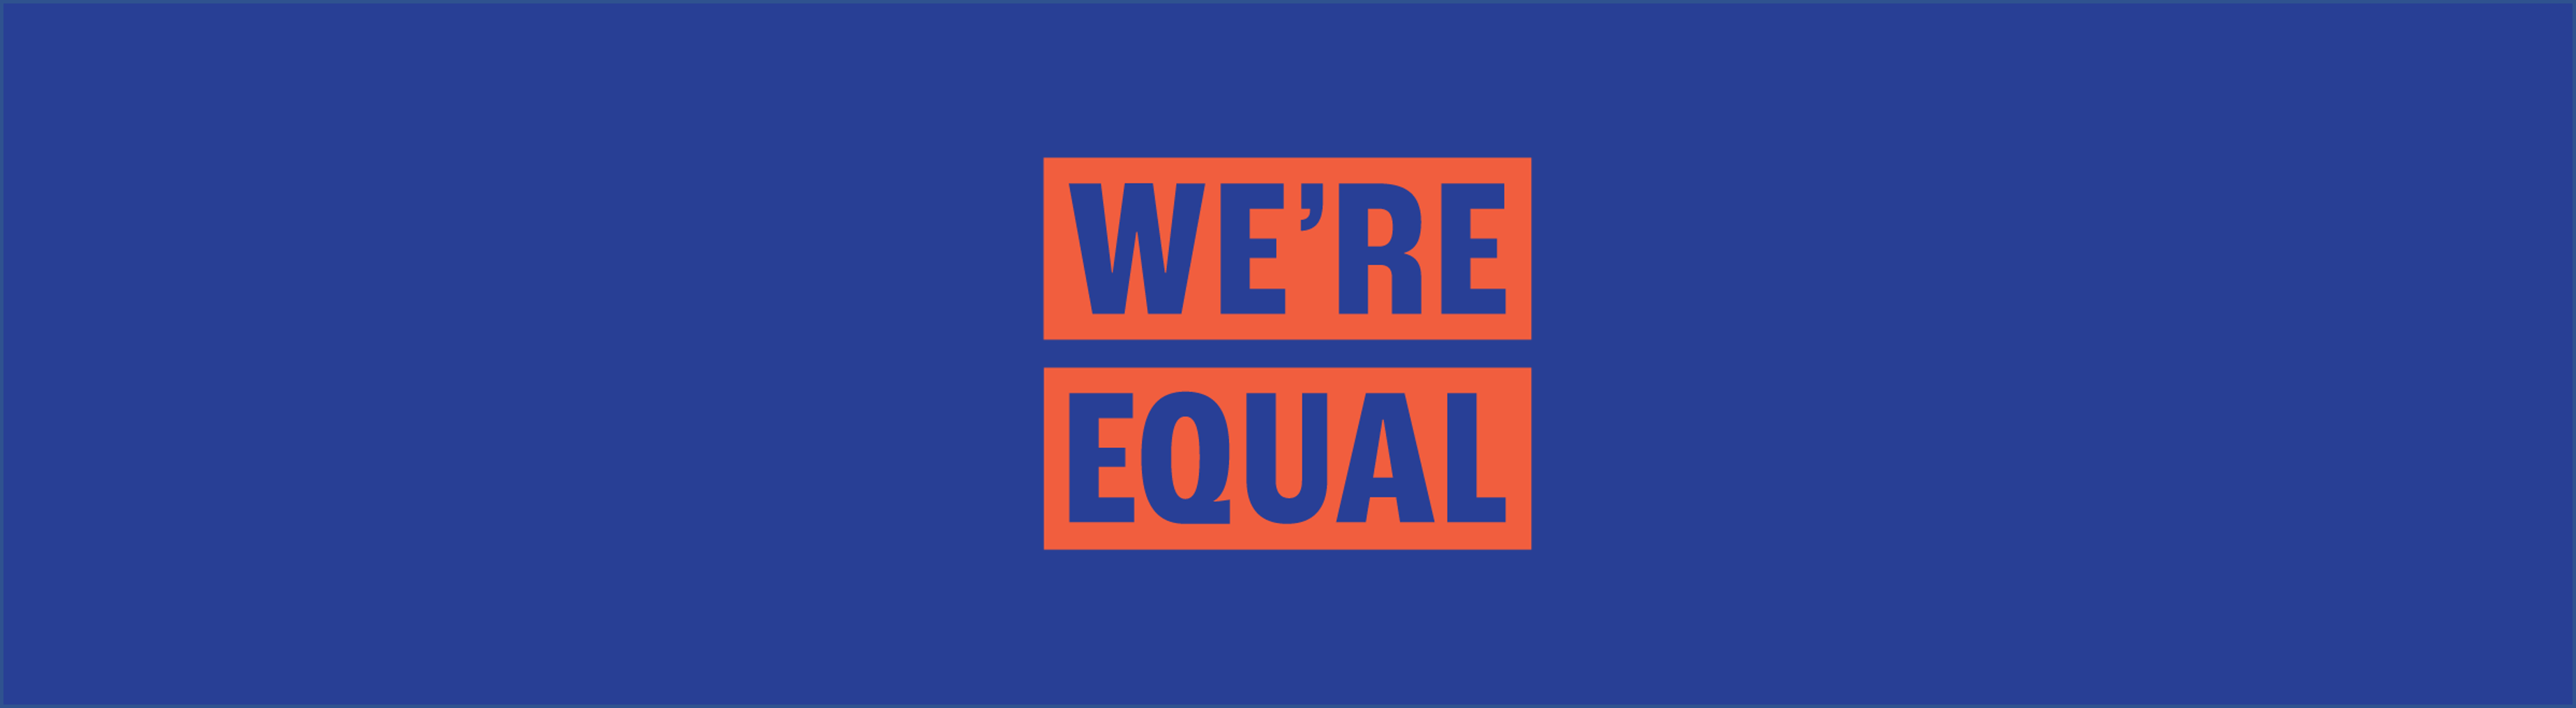 The WE'RE EQUAL initiative